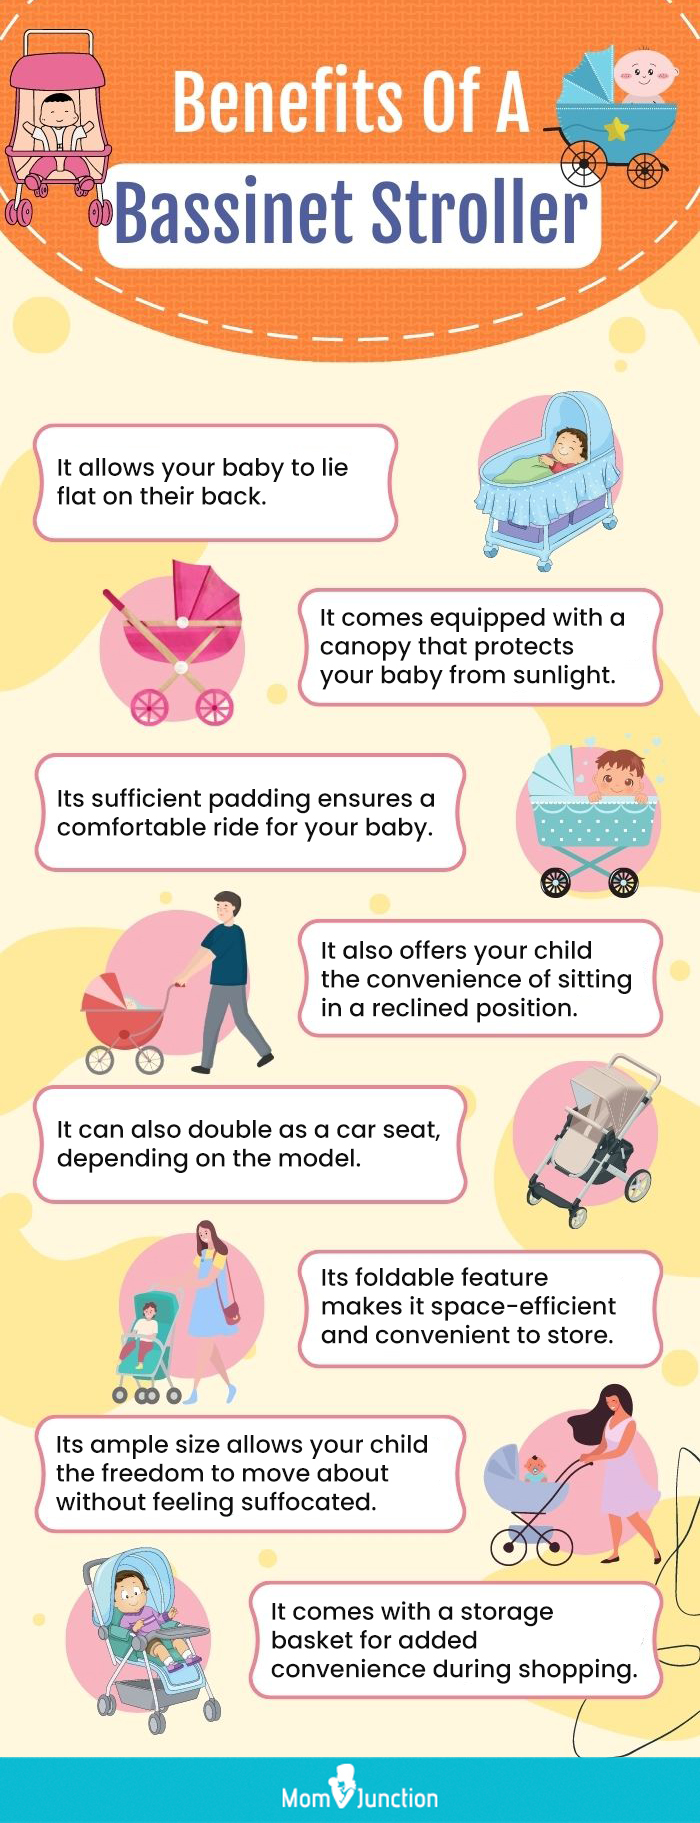 Benefits Of A Bassinet Stroller (infographic)